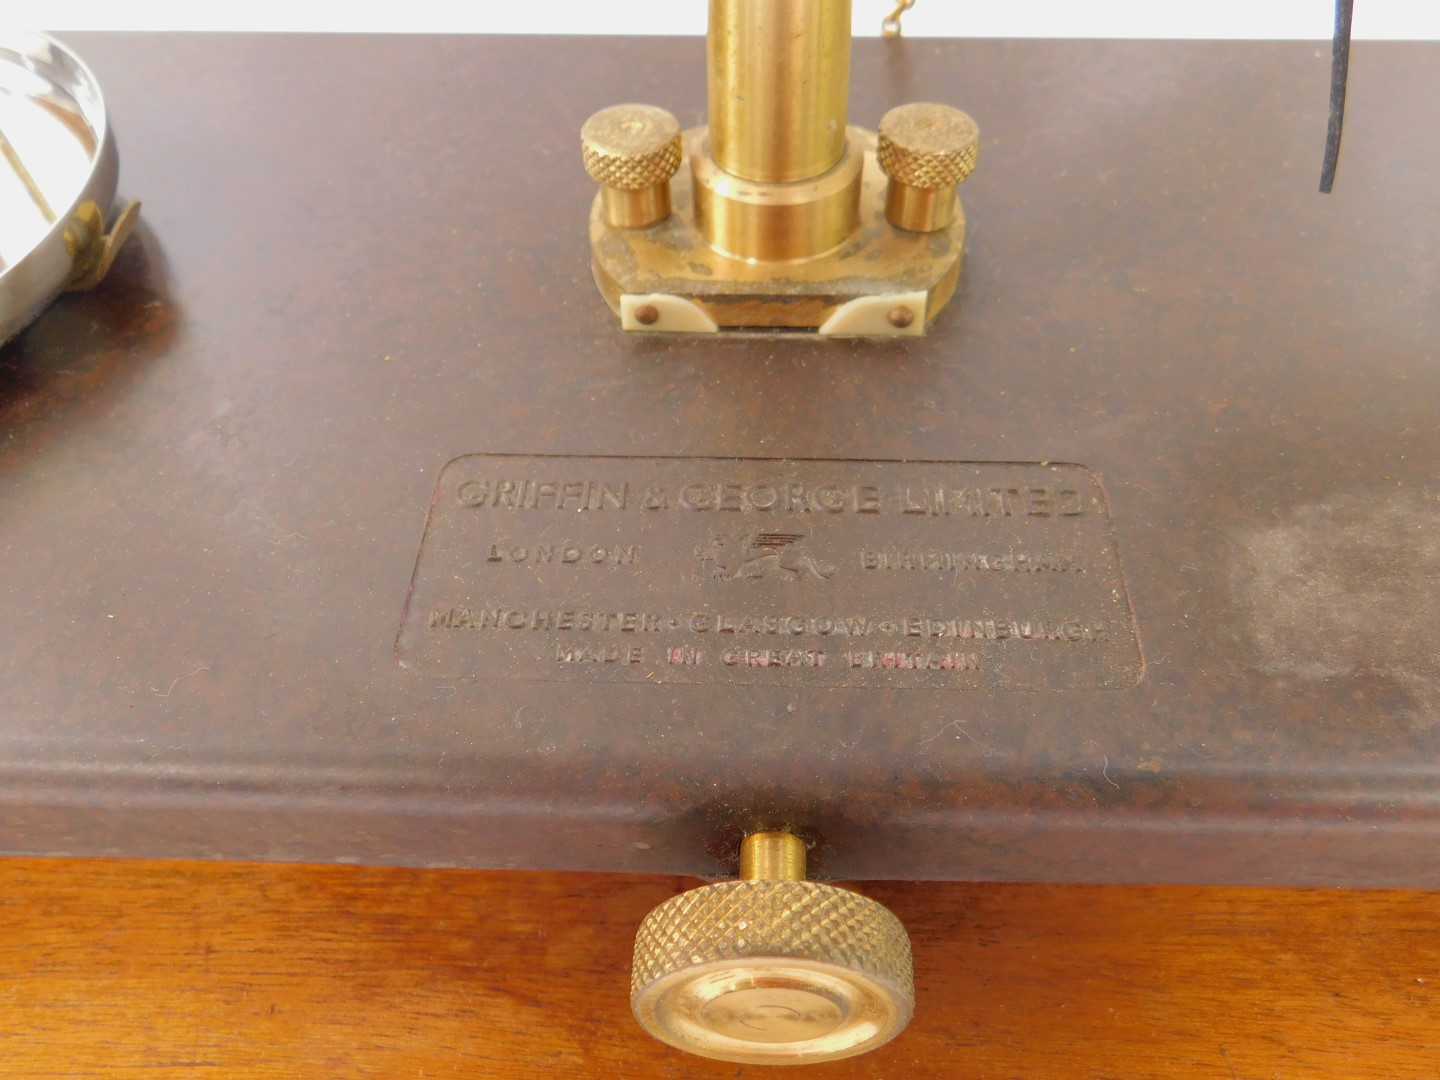 A set of early 20thC Griffin & George Ltd chain driven pharmacy scales, Regd no.830303, brass - Image 3 of 3